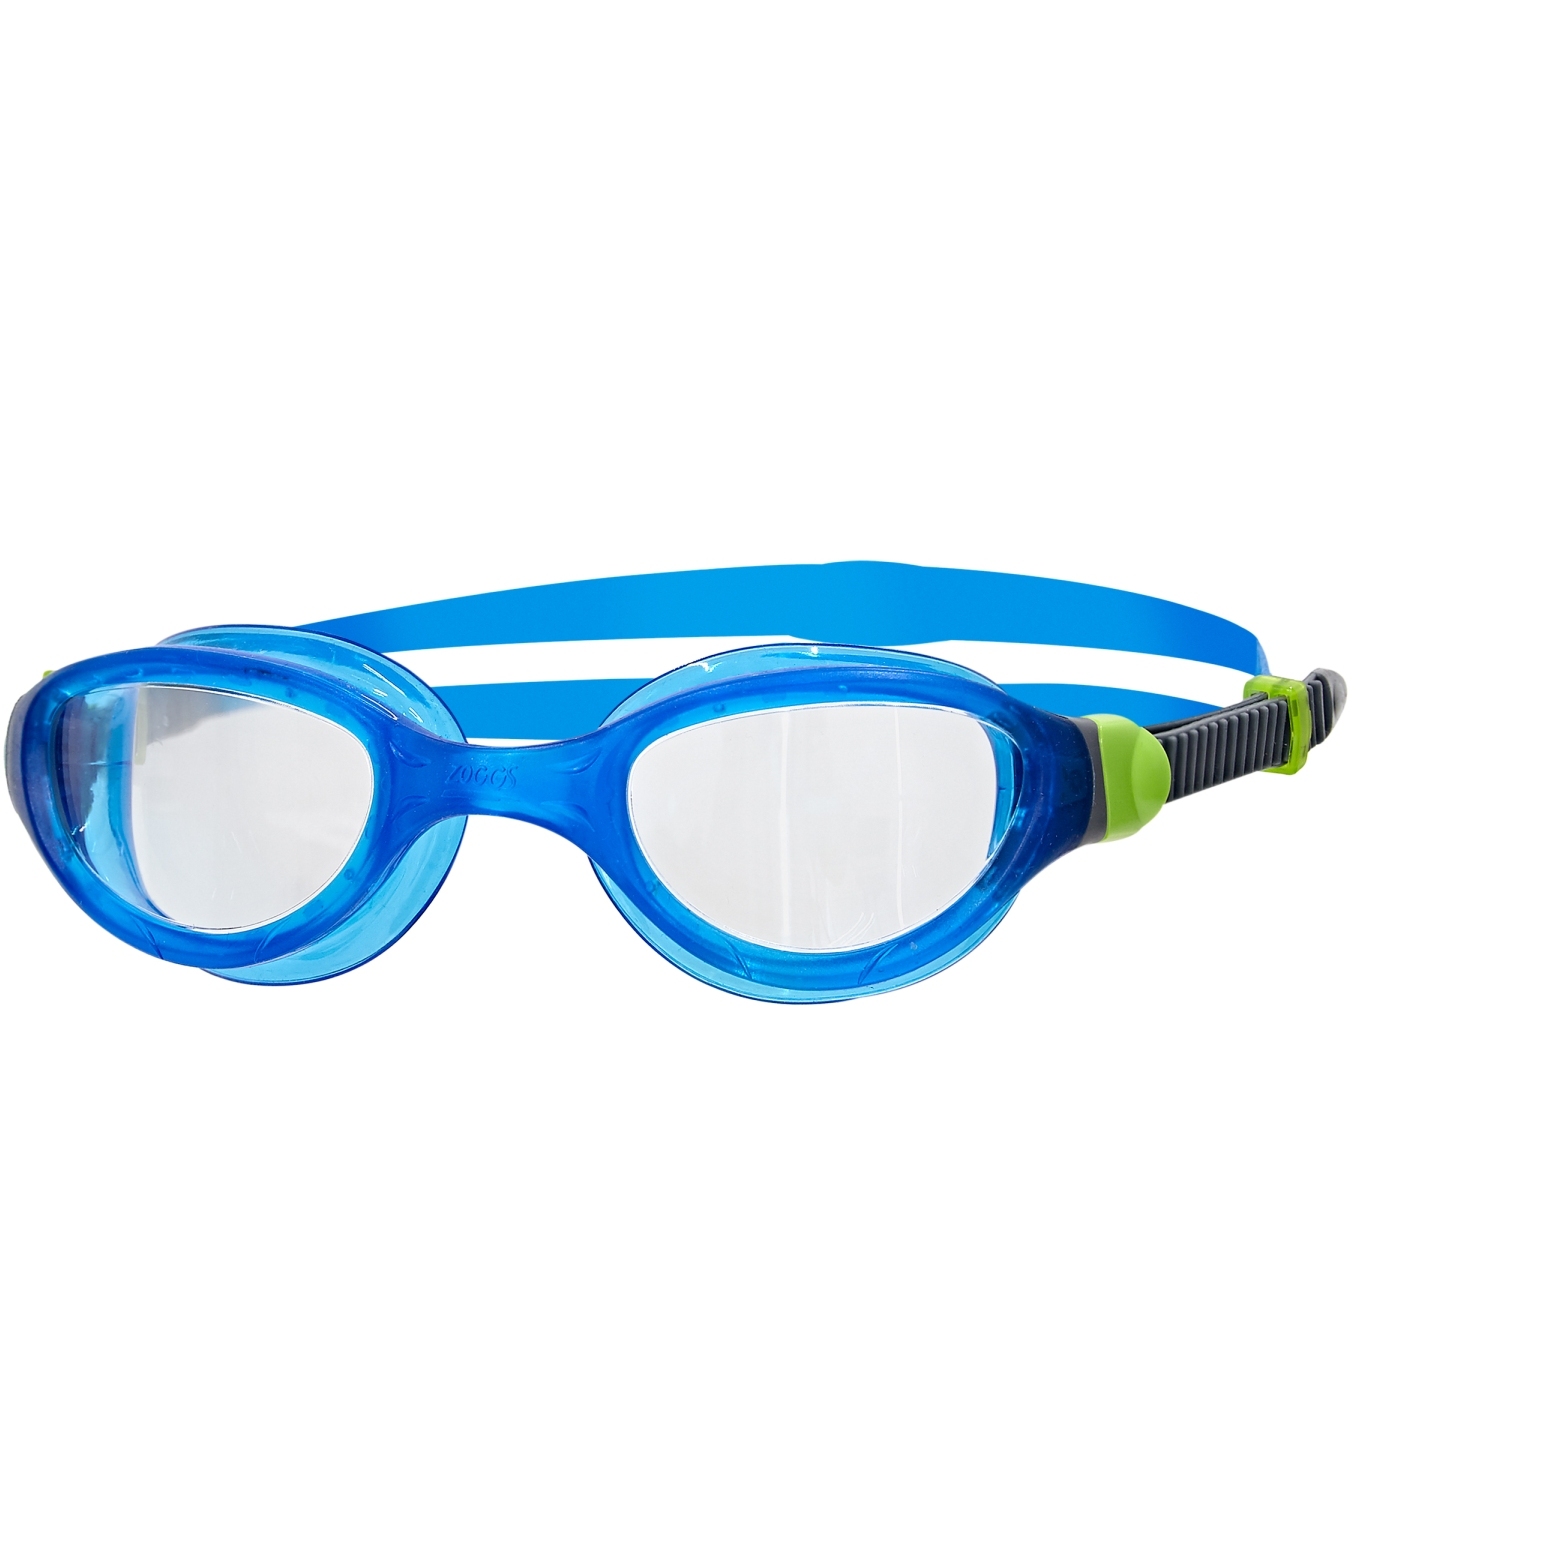 Picture of Zoggs Phantom 2.0 Swimming Goggles - translucent blue/green/clear